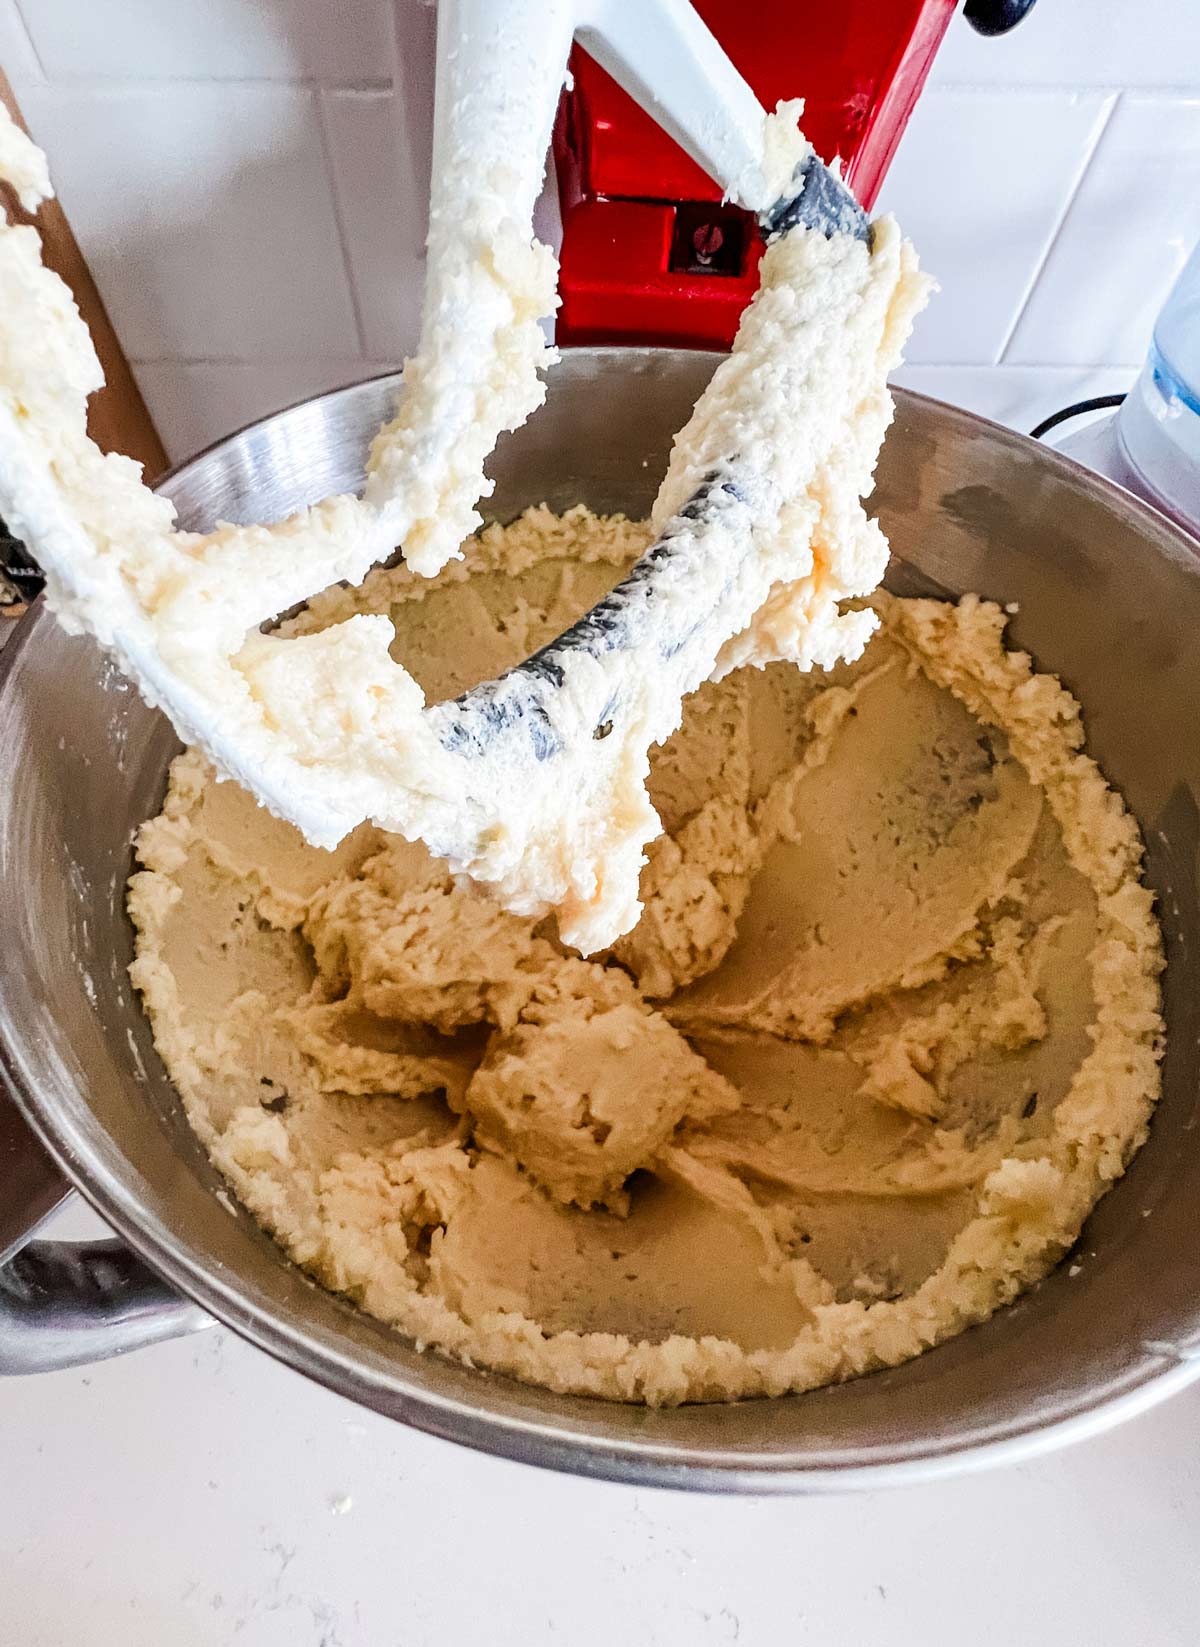 Creamed butter and sugar in the bowl of a stand mixer.